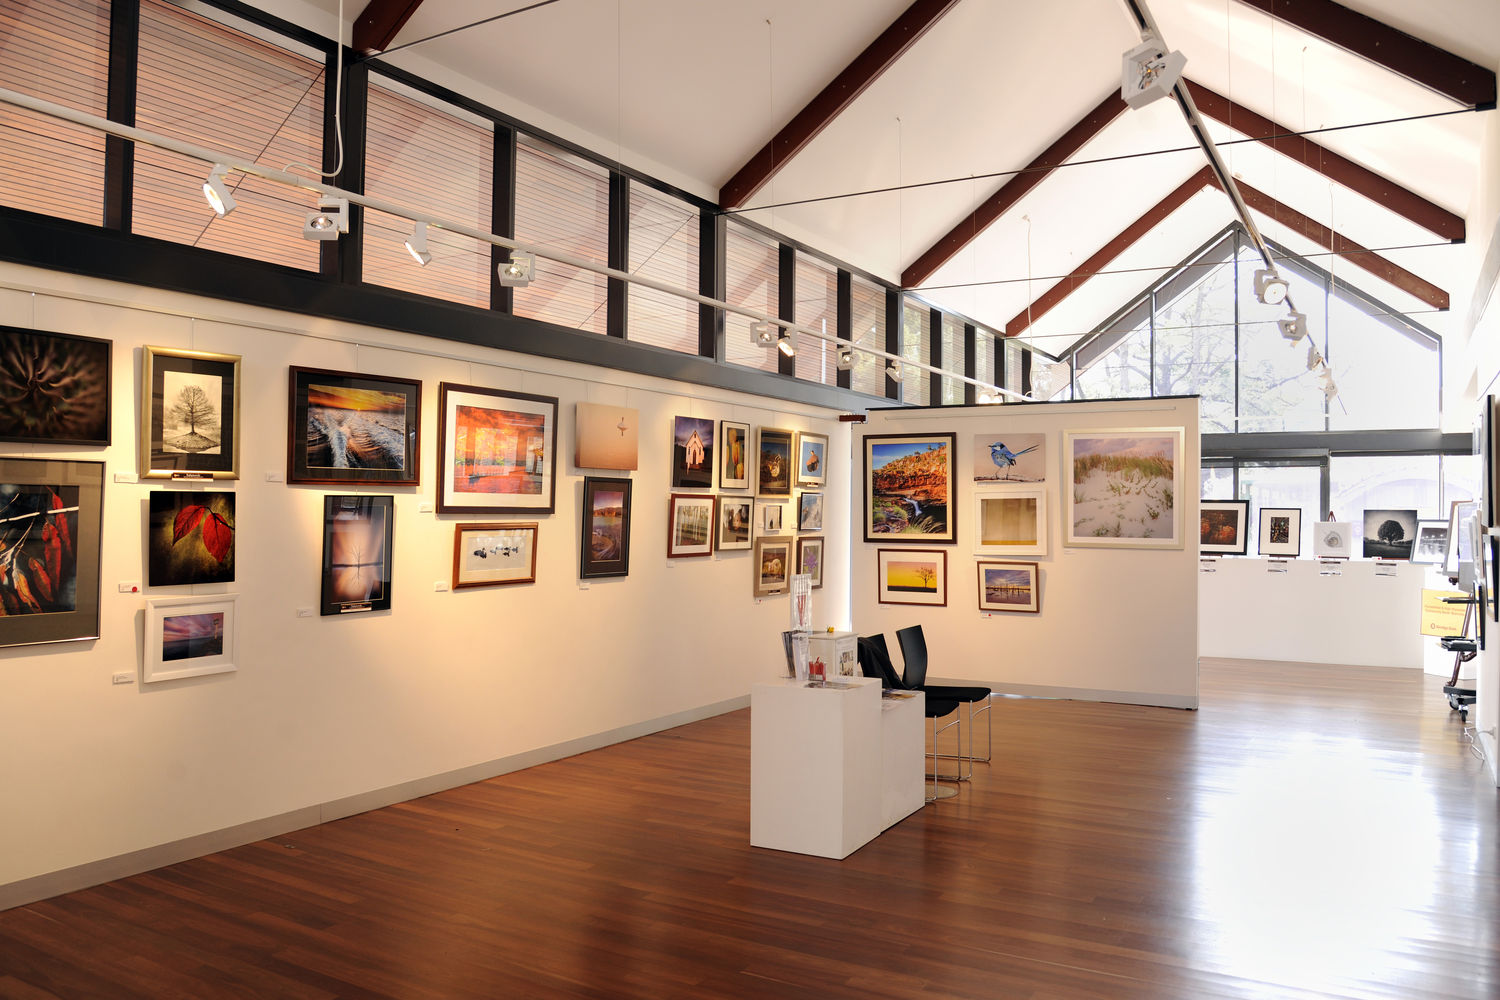 Interior View of the Zig Zag Gallery during one of the exhibitions